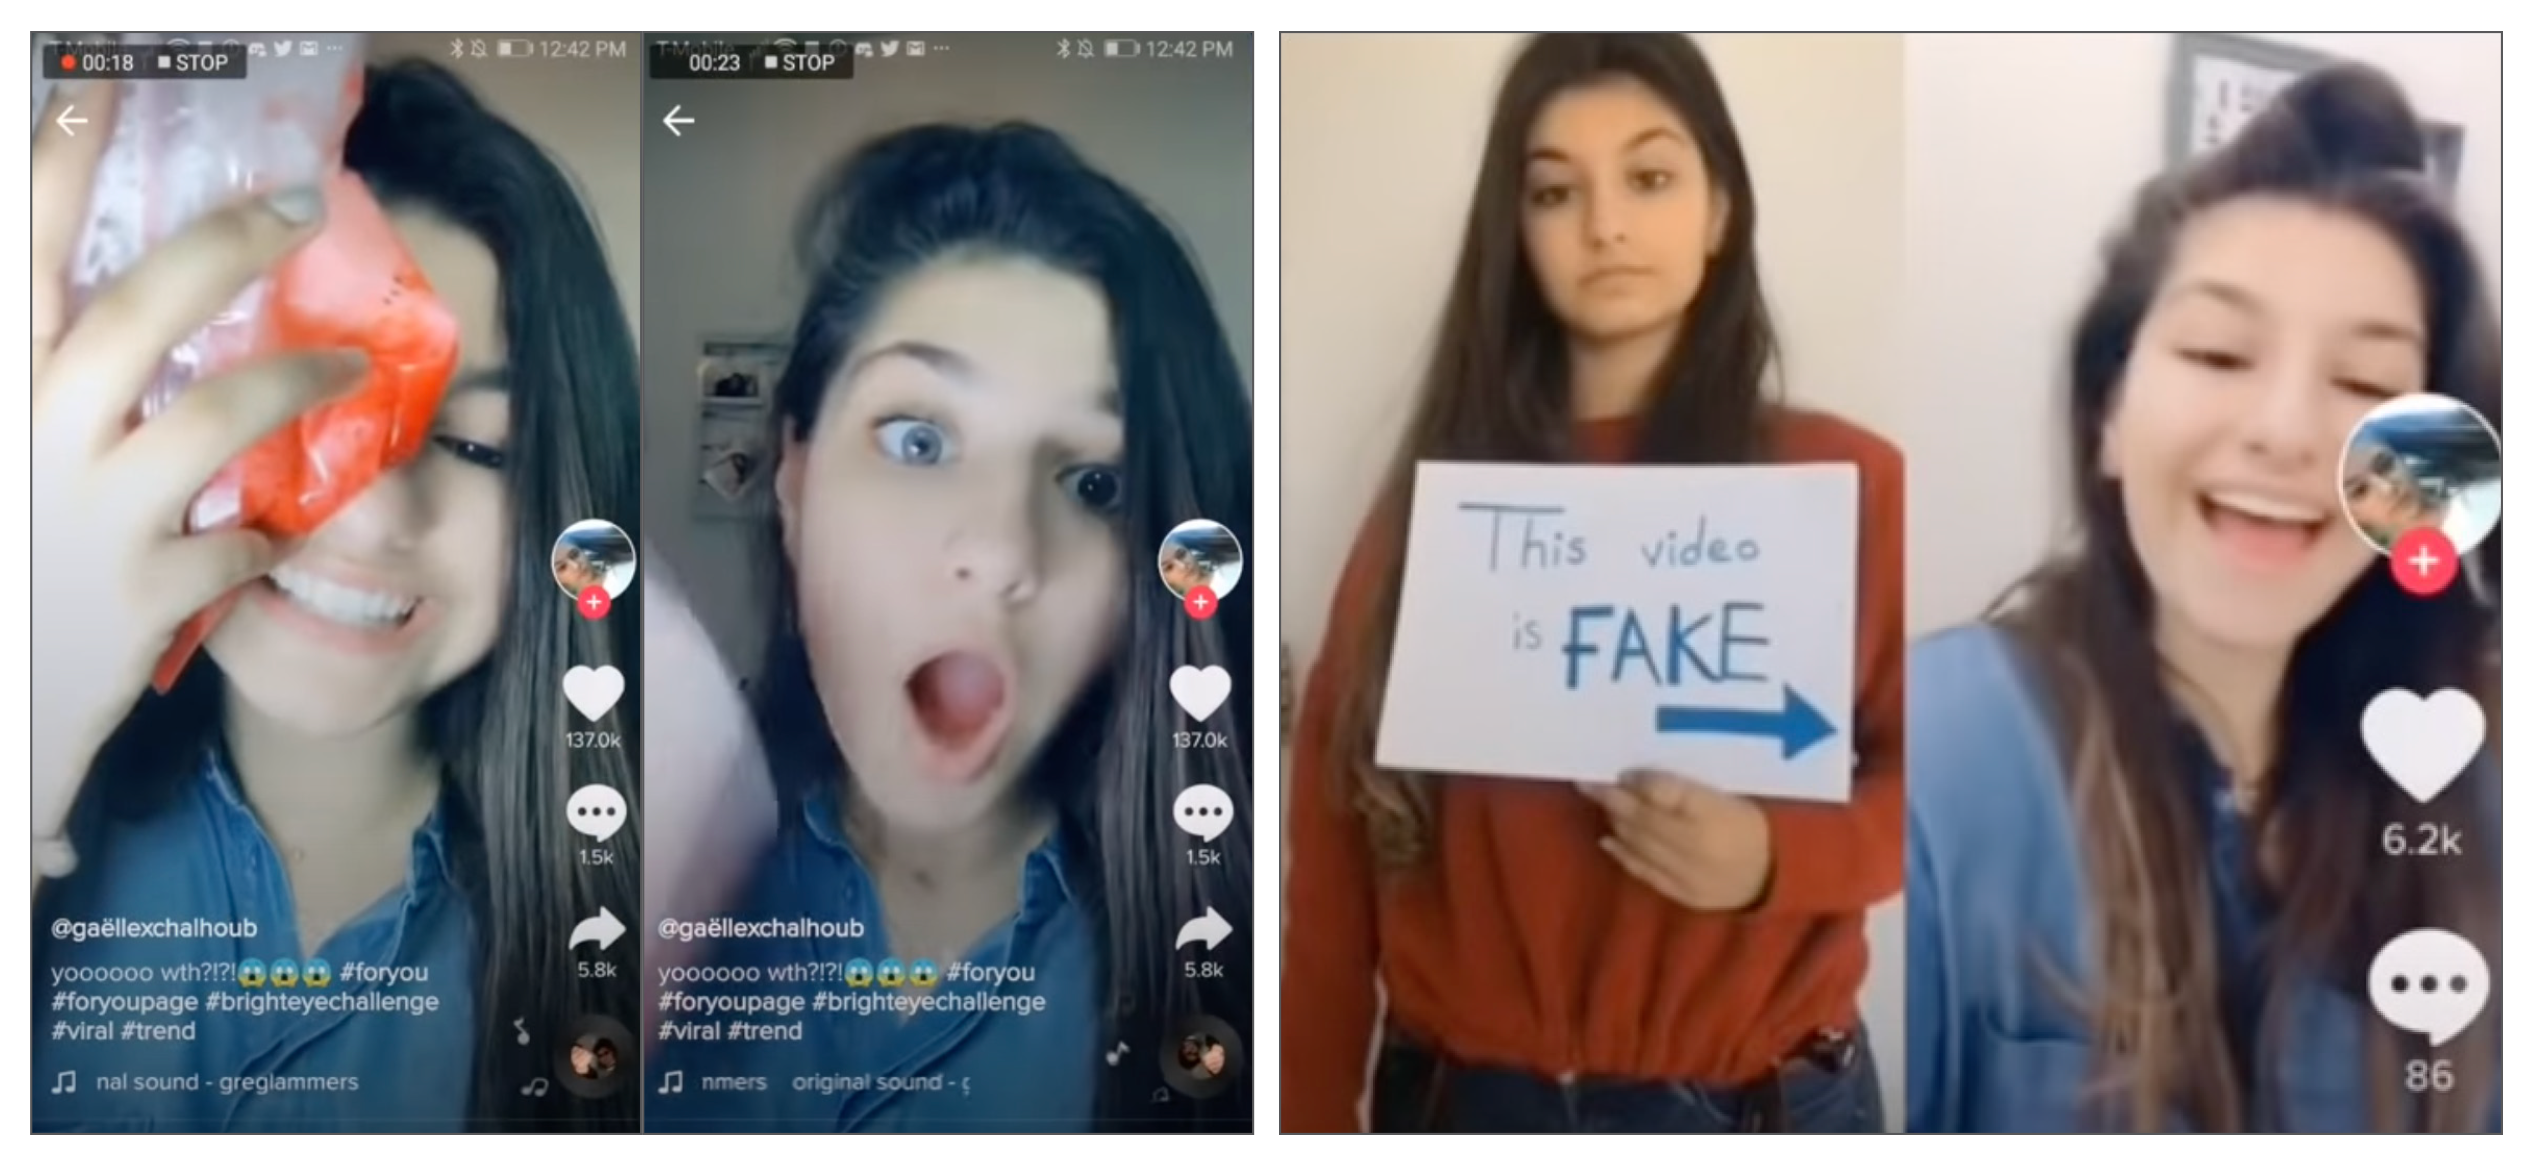 Many online trends can contribute inadvertently to adverse ophthalmic effects. Even when the infamous “bright eye challenge” on Tiktok was debunked as a fake, videos remained in circulation and helped create an environment of misinformation.